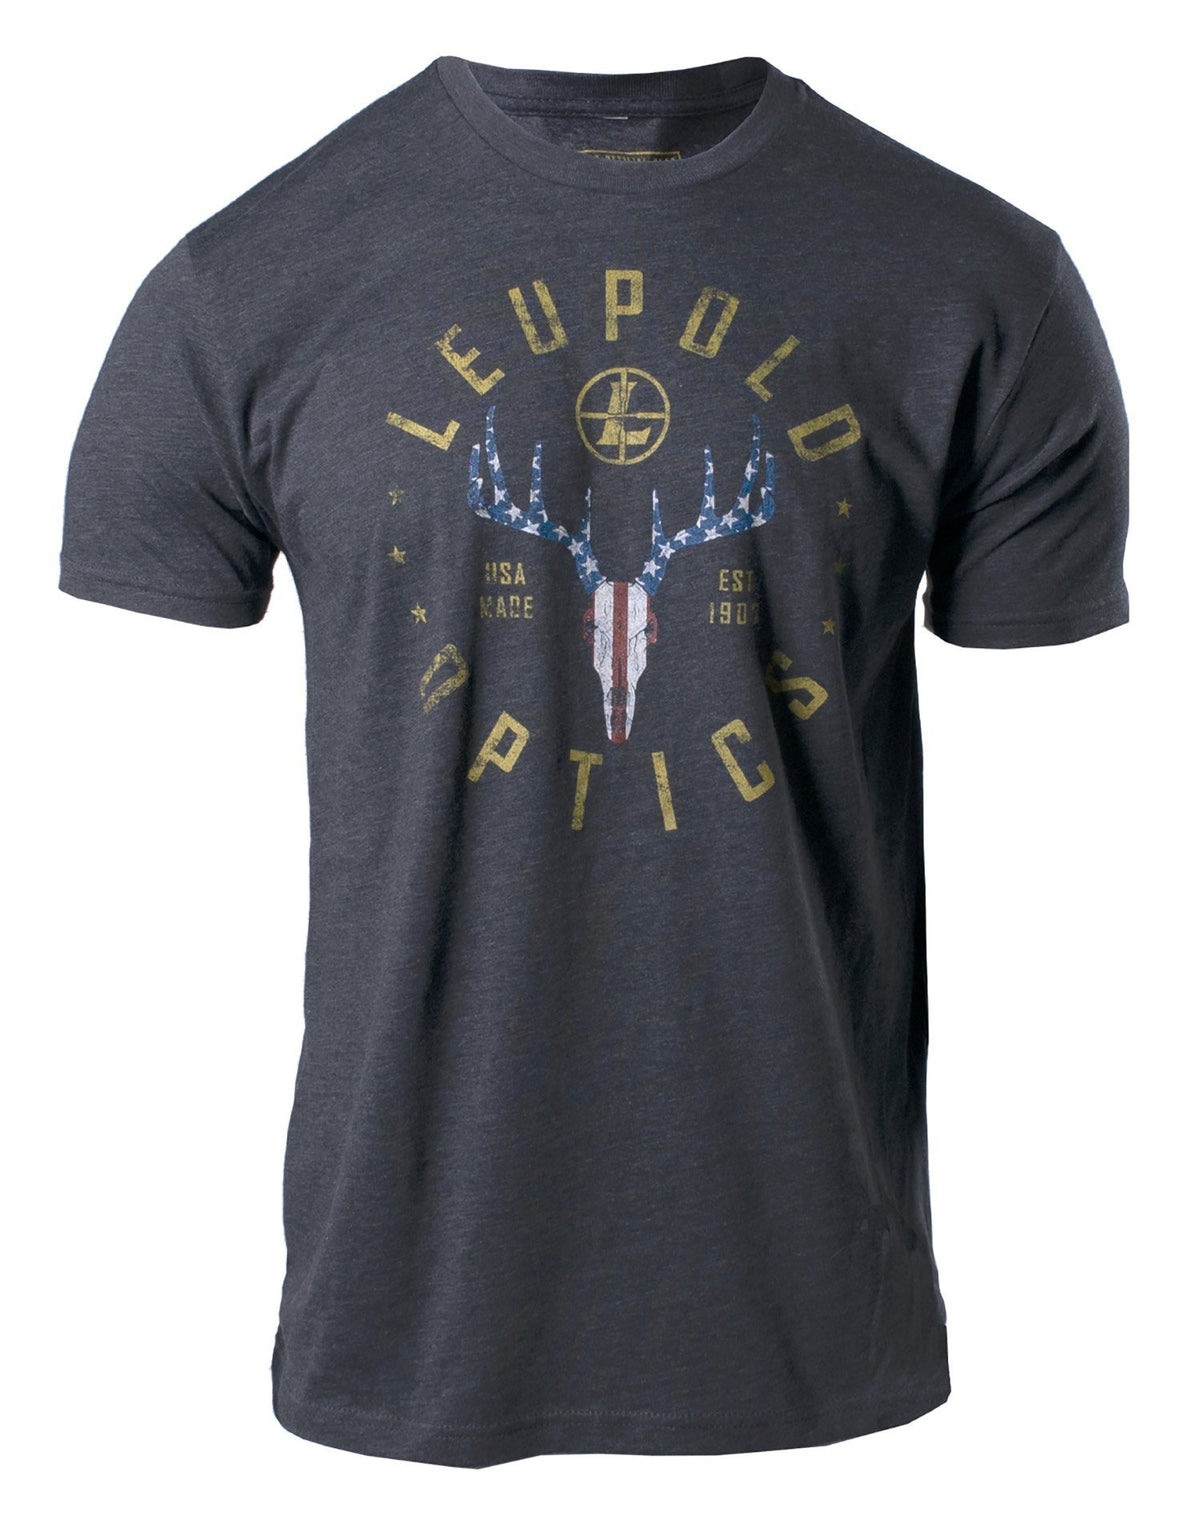 Leupold American Whitetail T-Shirt Charcoal Gray Large Short Sleeve - Pacific Flyway Supplies